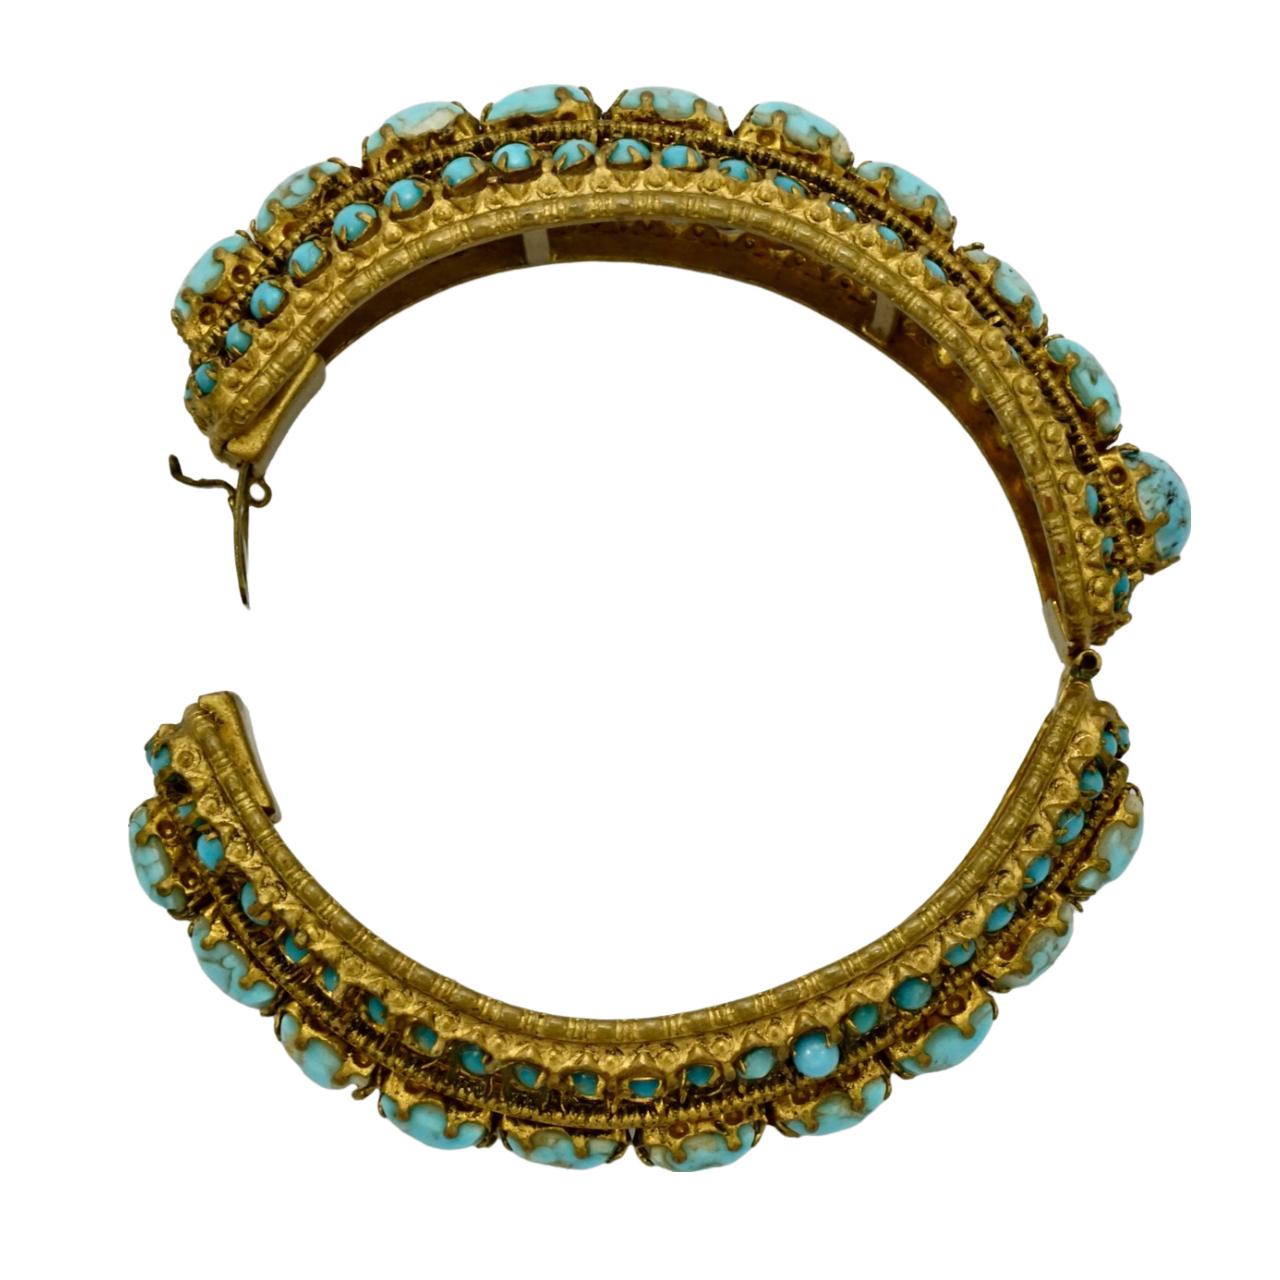 Gold Plated and Black Enamel Bangle Bracelet with Faux Turquoise Stones For Sale 2